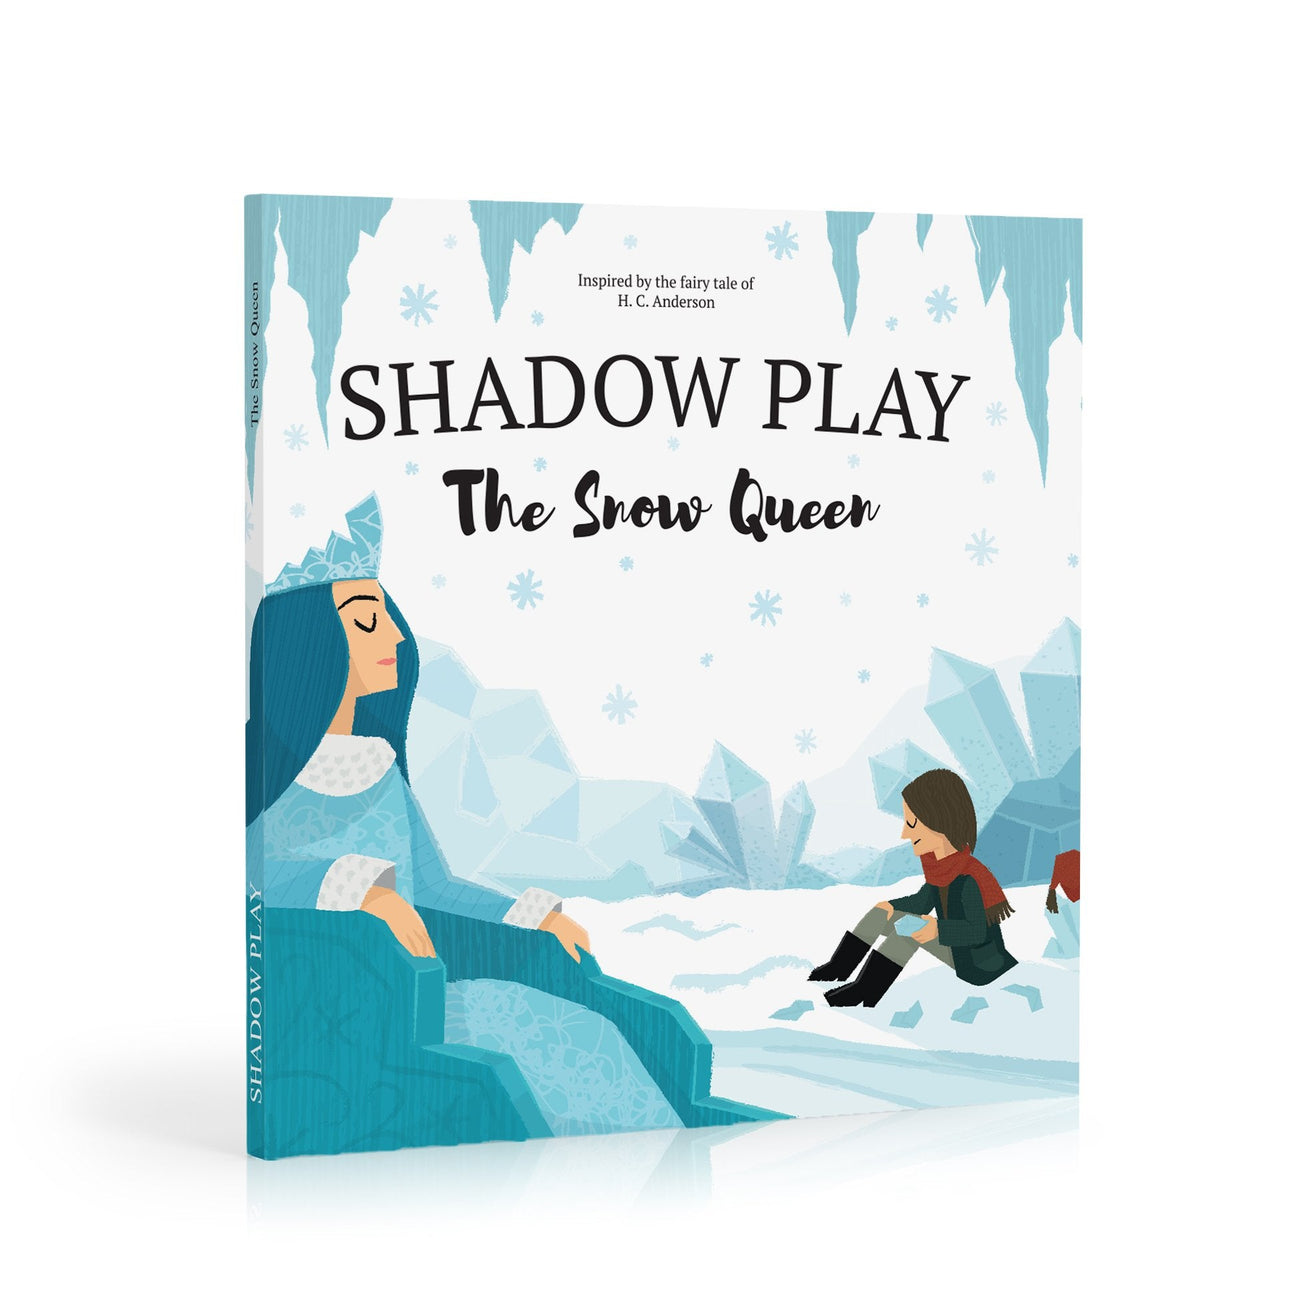 SHAPLABOO Magic Box | The Snow Queen#story_the-snow-queen